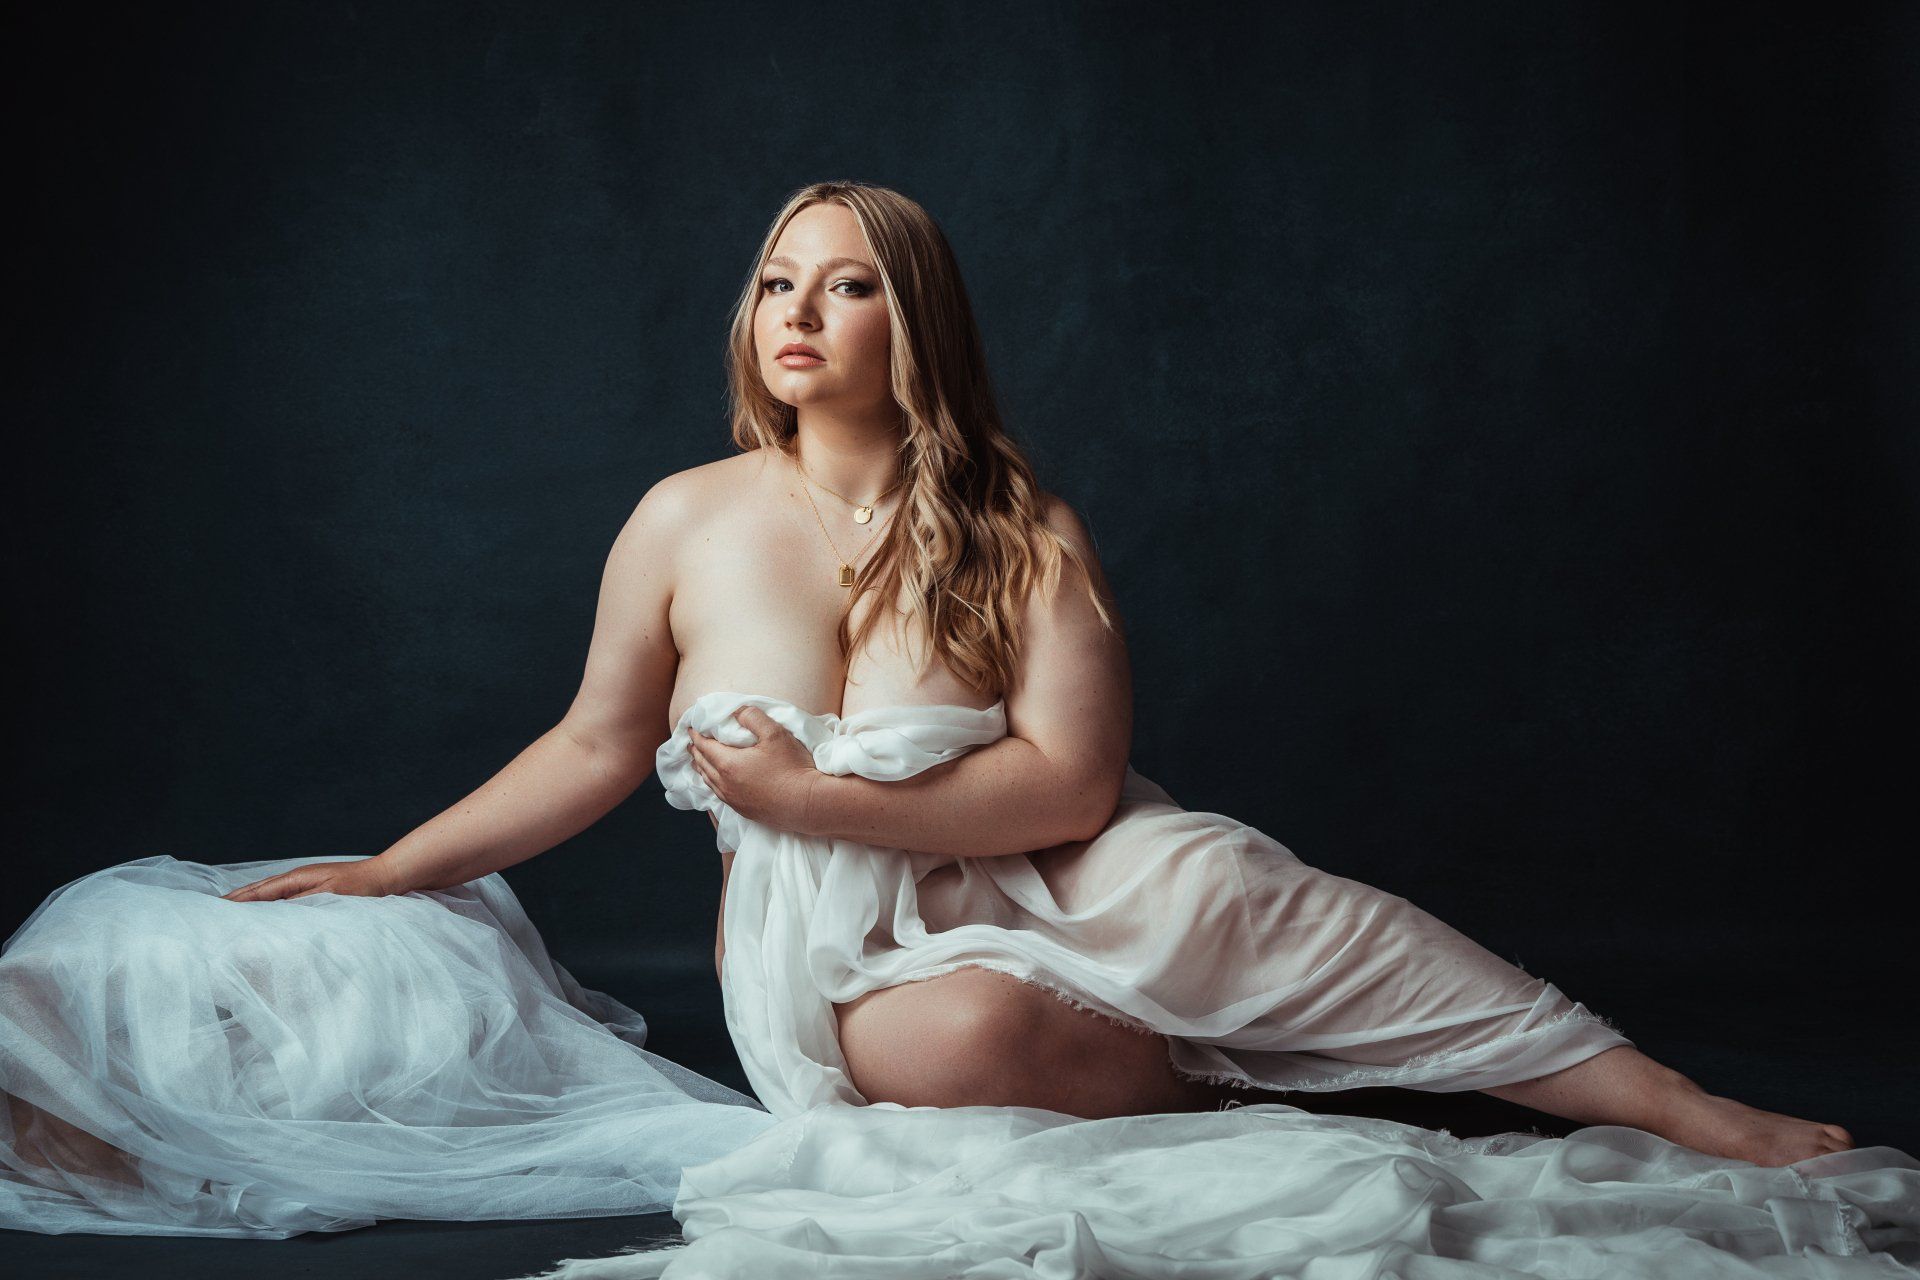 A nude woman in a white dress sitting on a black background.